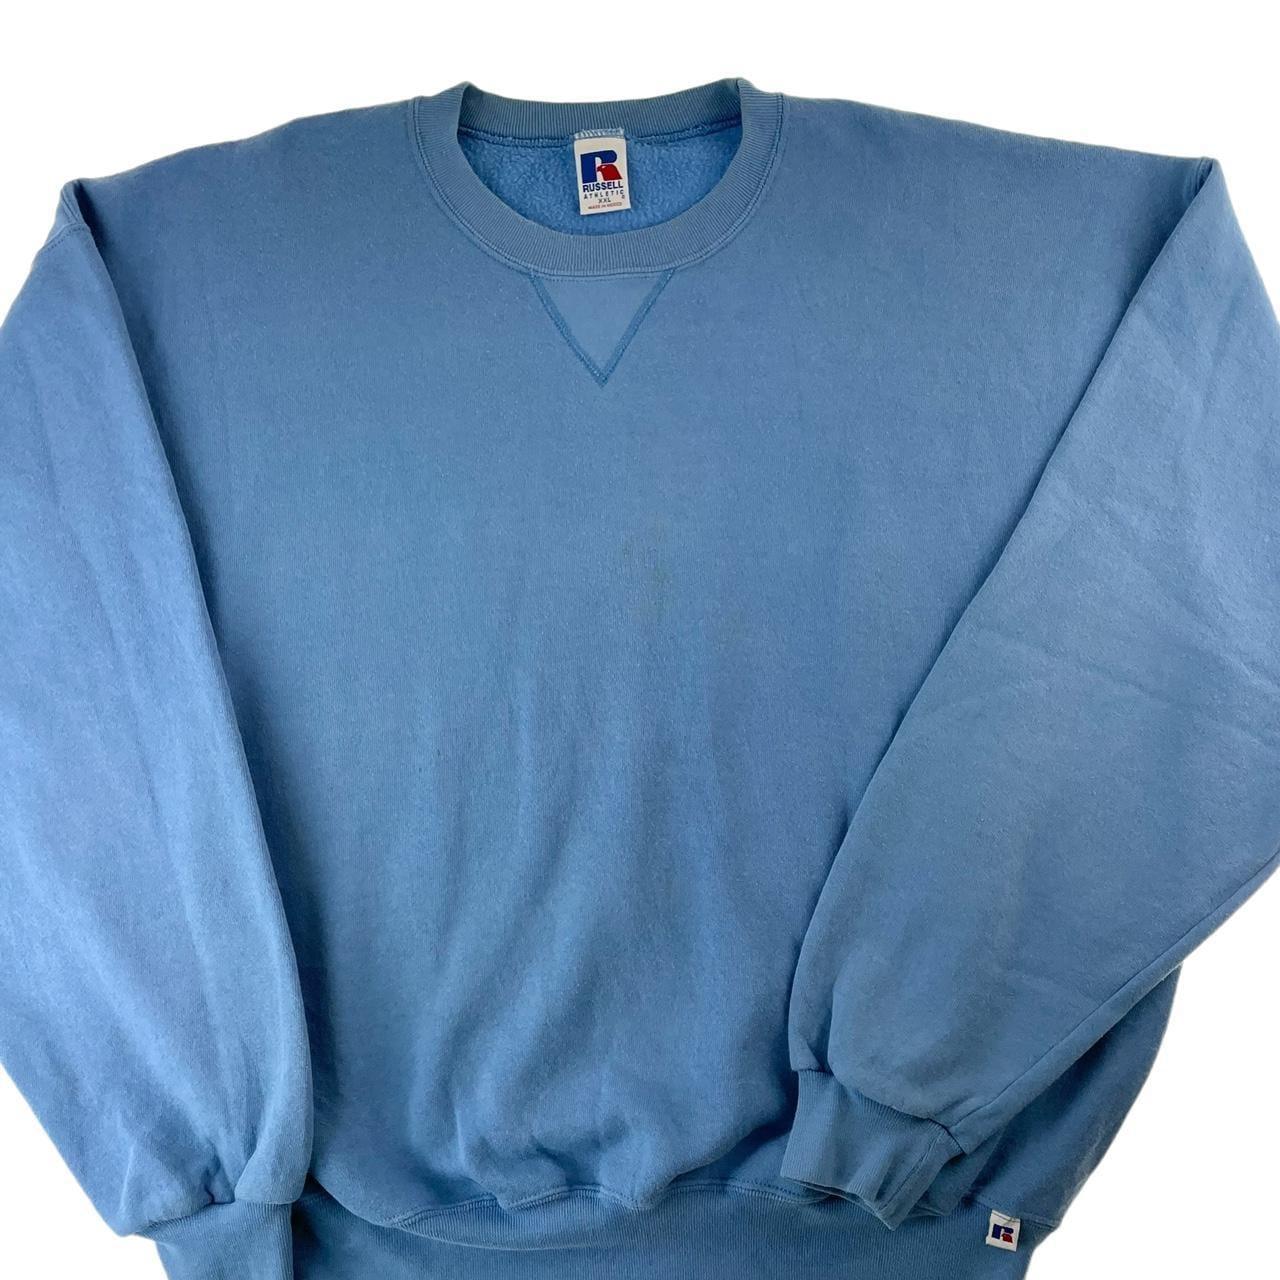 Vintage Russell Athletic jumper sweatshirt size XXL - Known Source